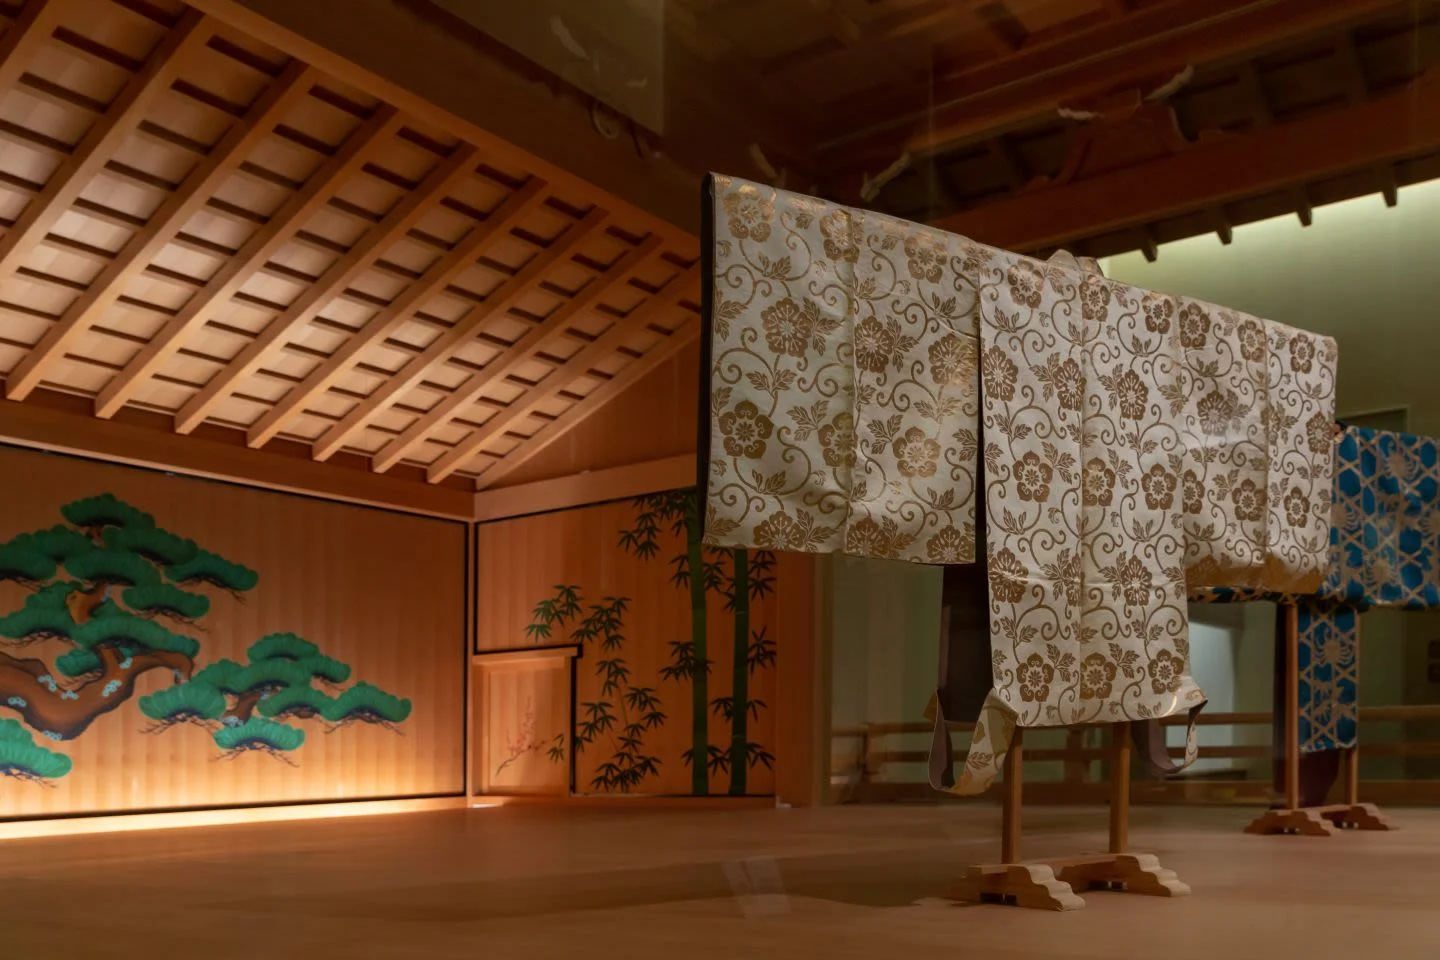 Tokugawa Art Museum After-Hours Tour & Dinner in Nagoya